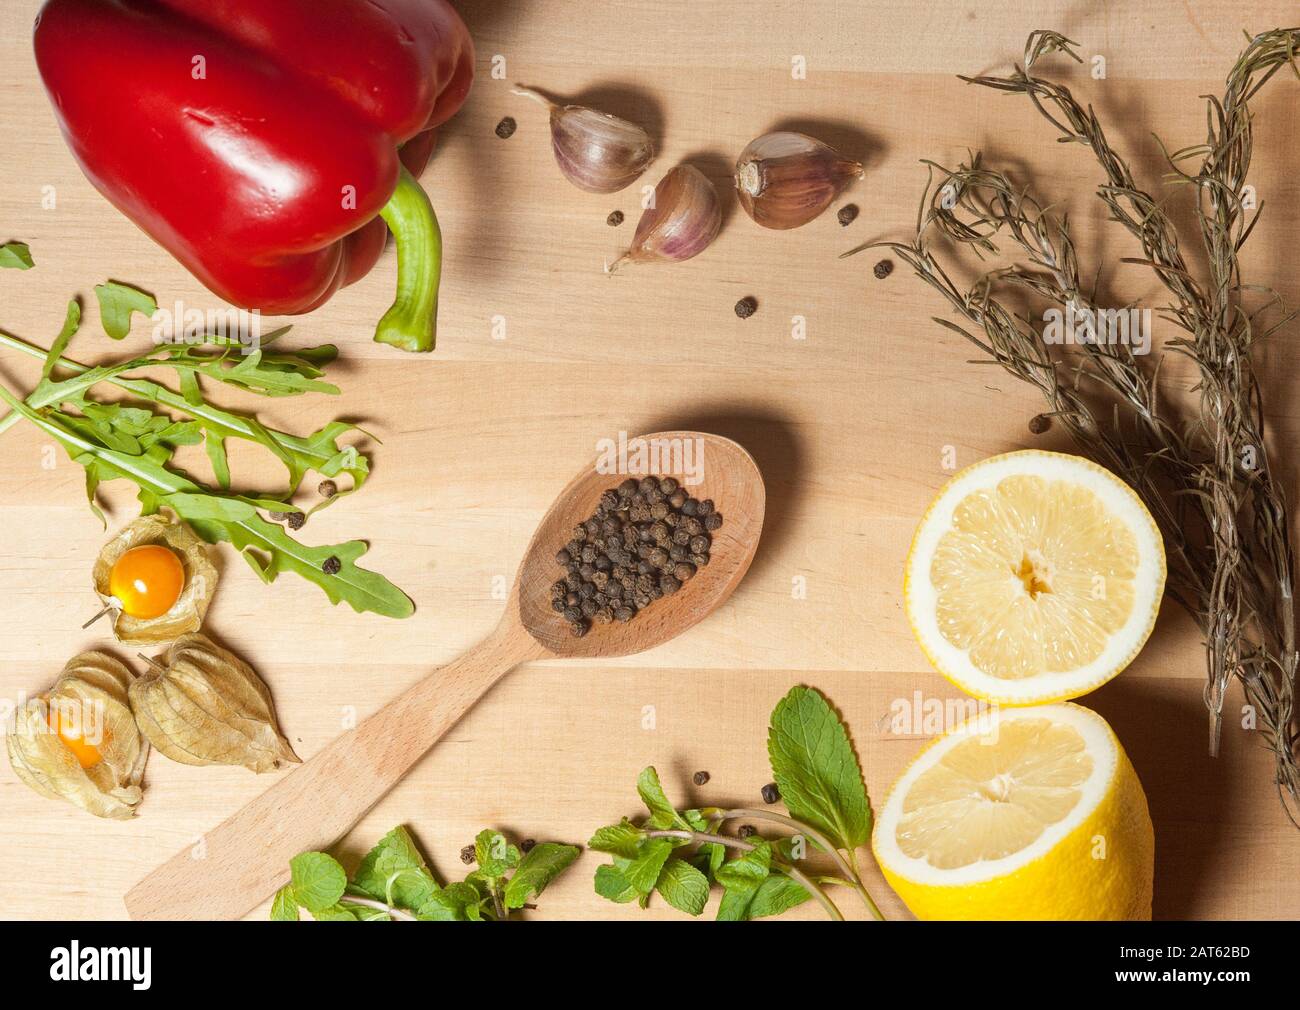 spices and vegetables on a wooden board with a bed in the center of the frame Stock Photo